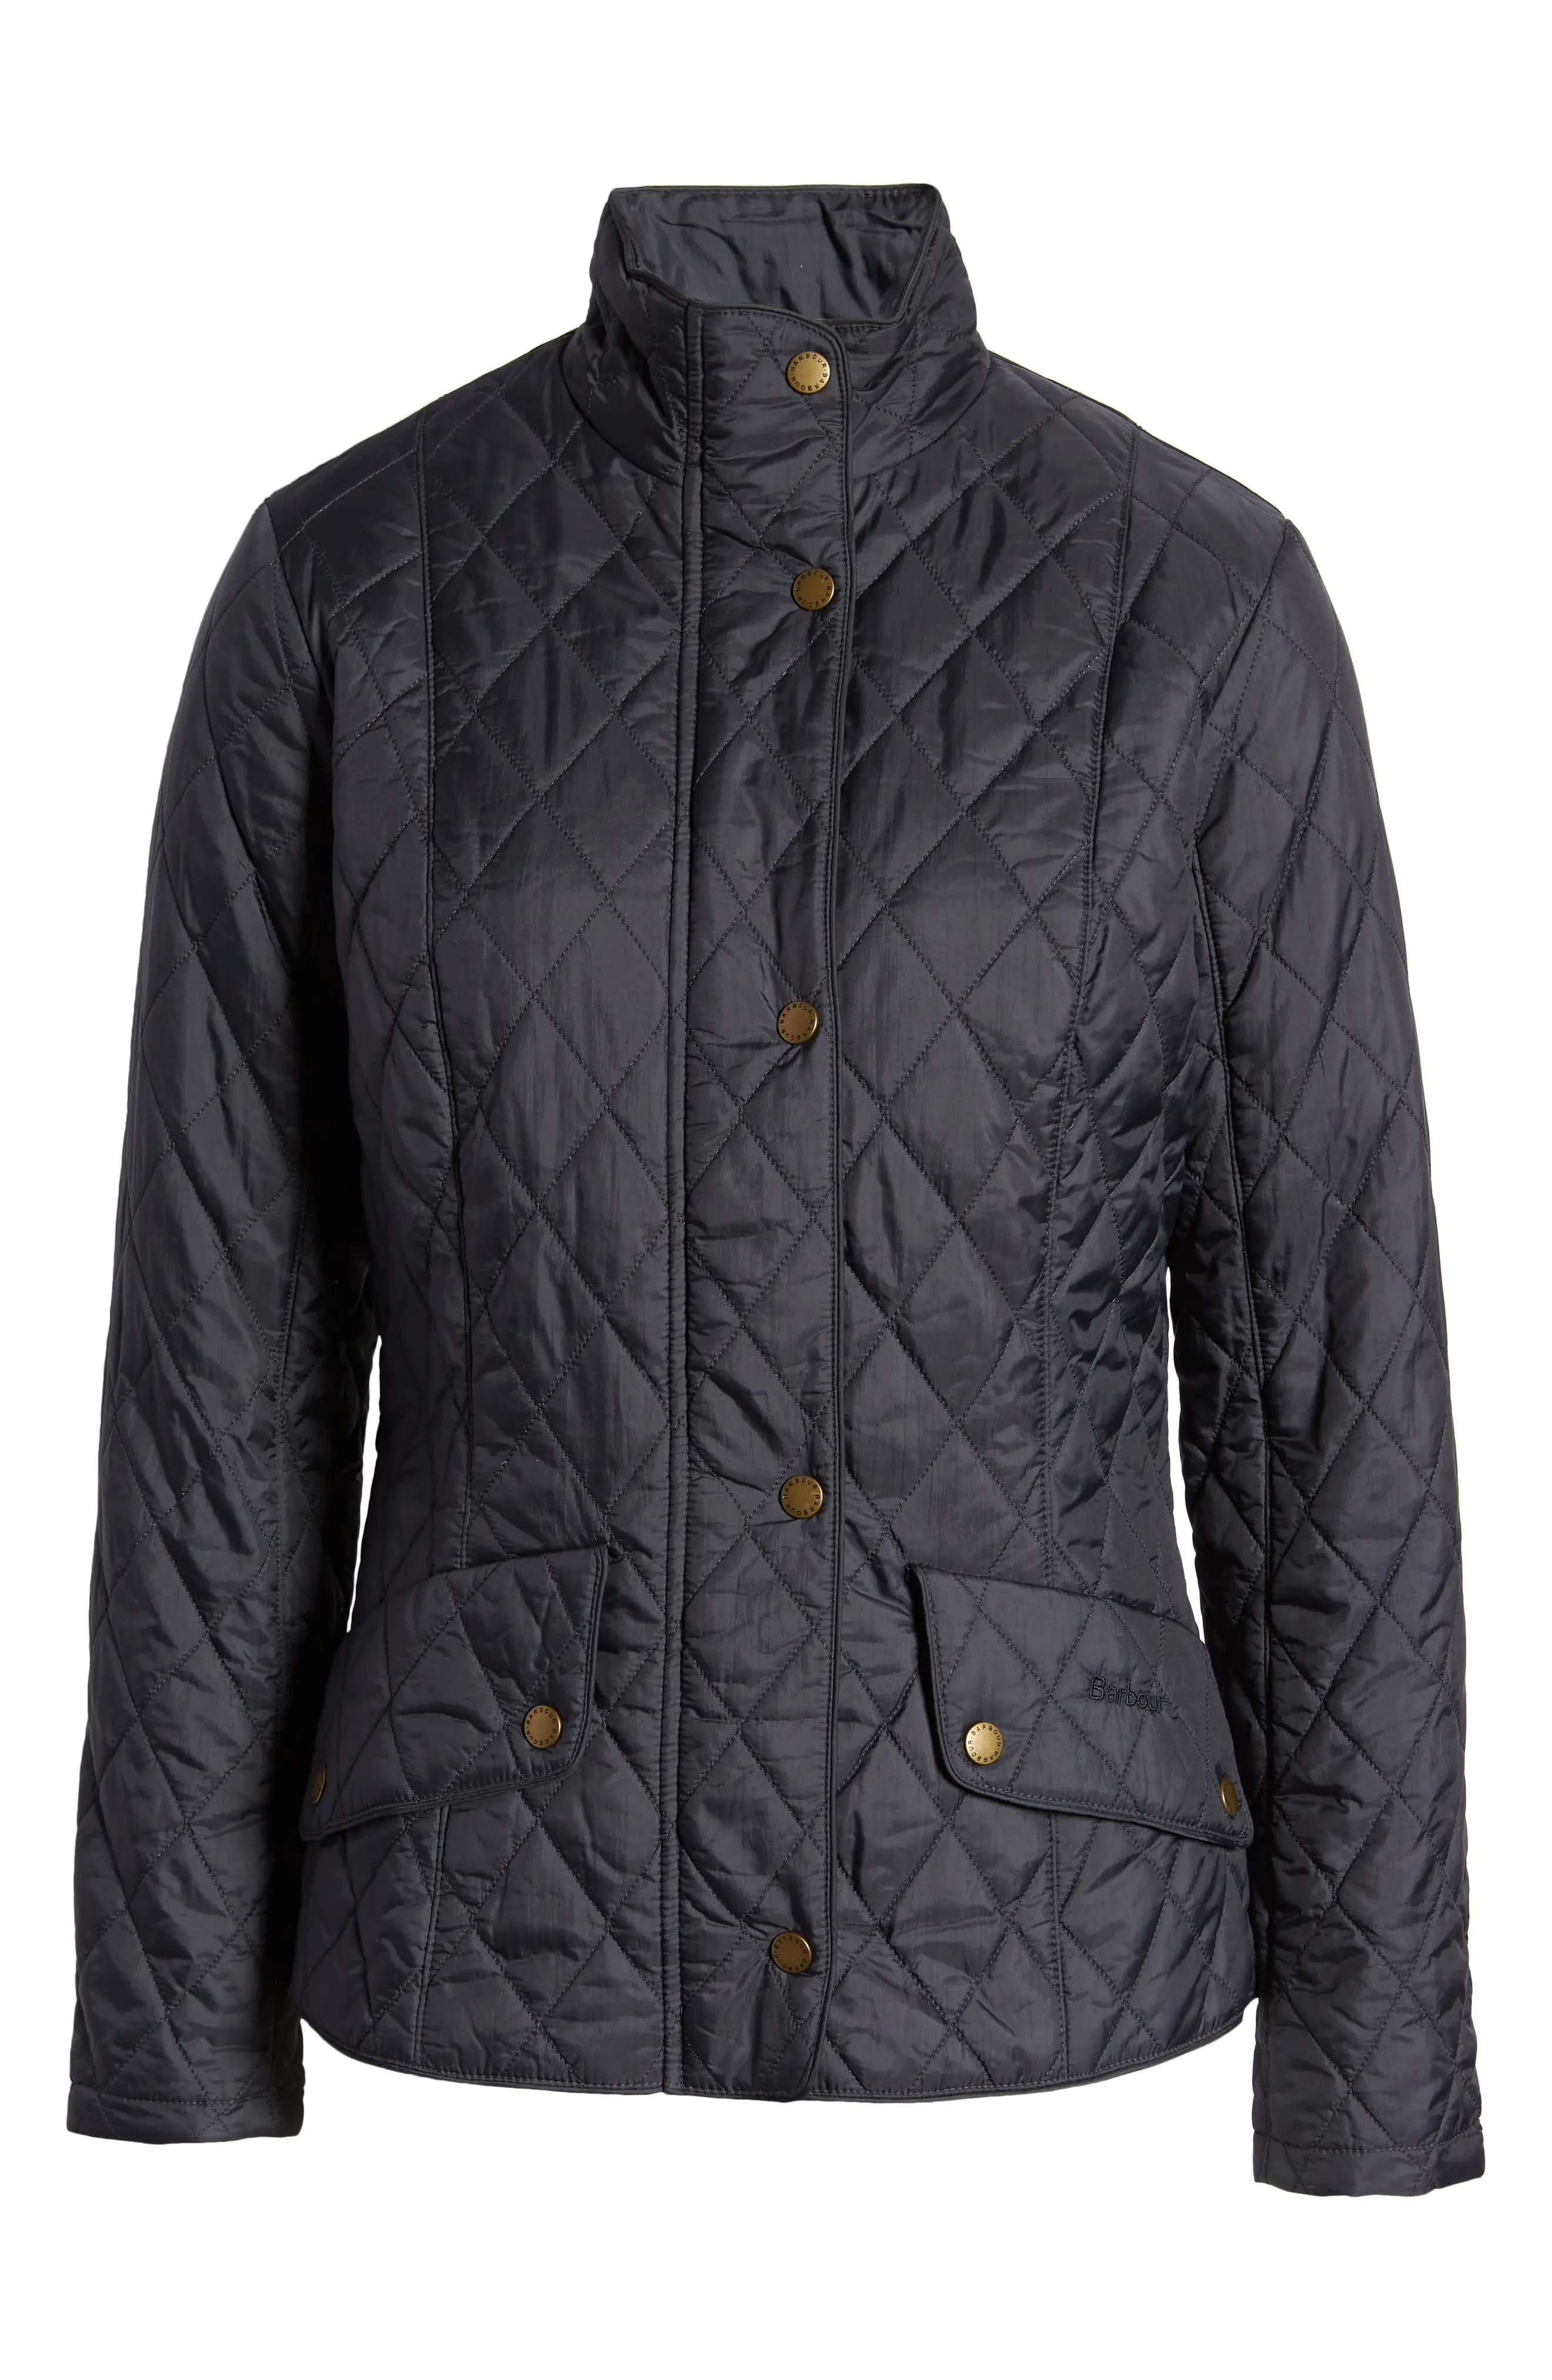 Flyweight Quilted Jacket - 6